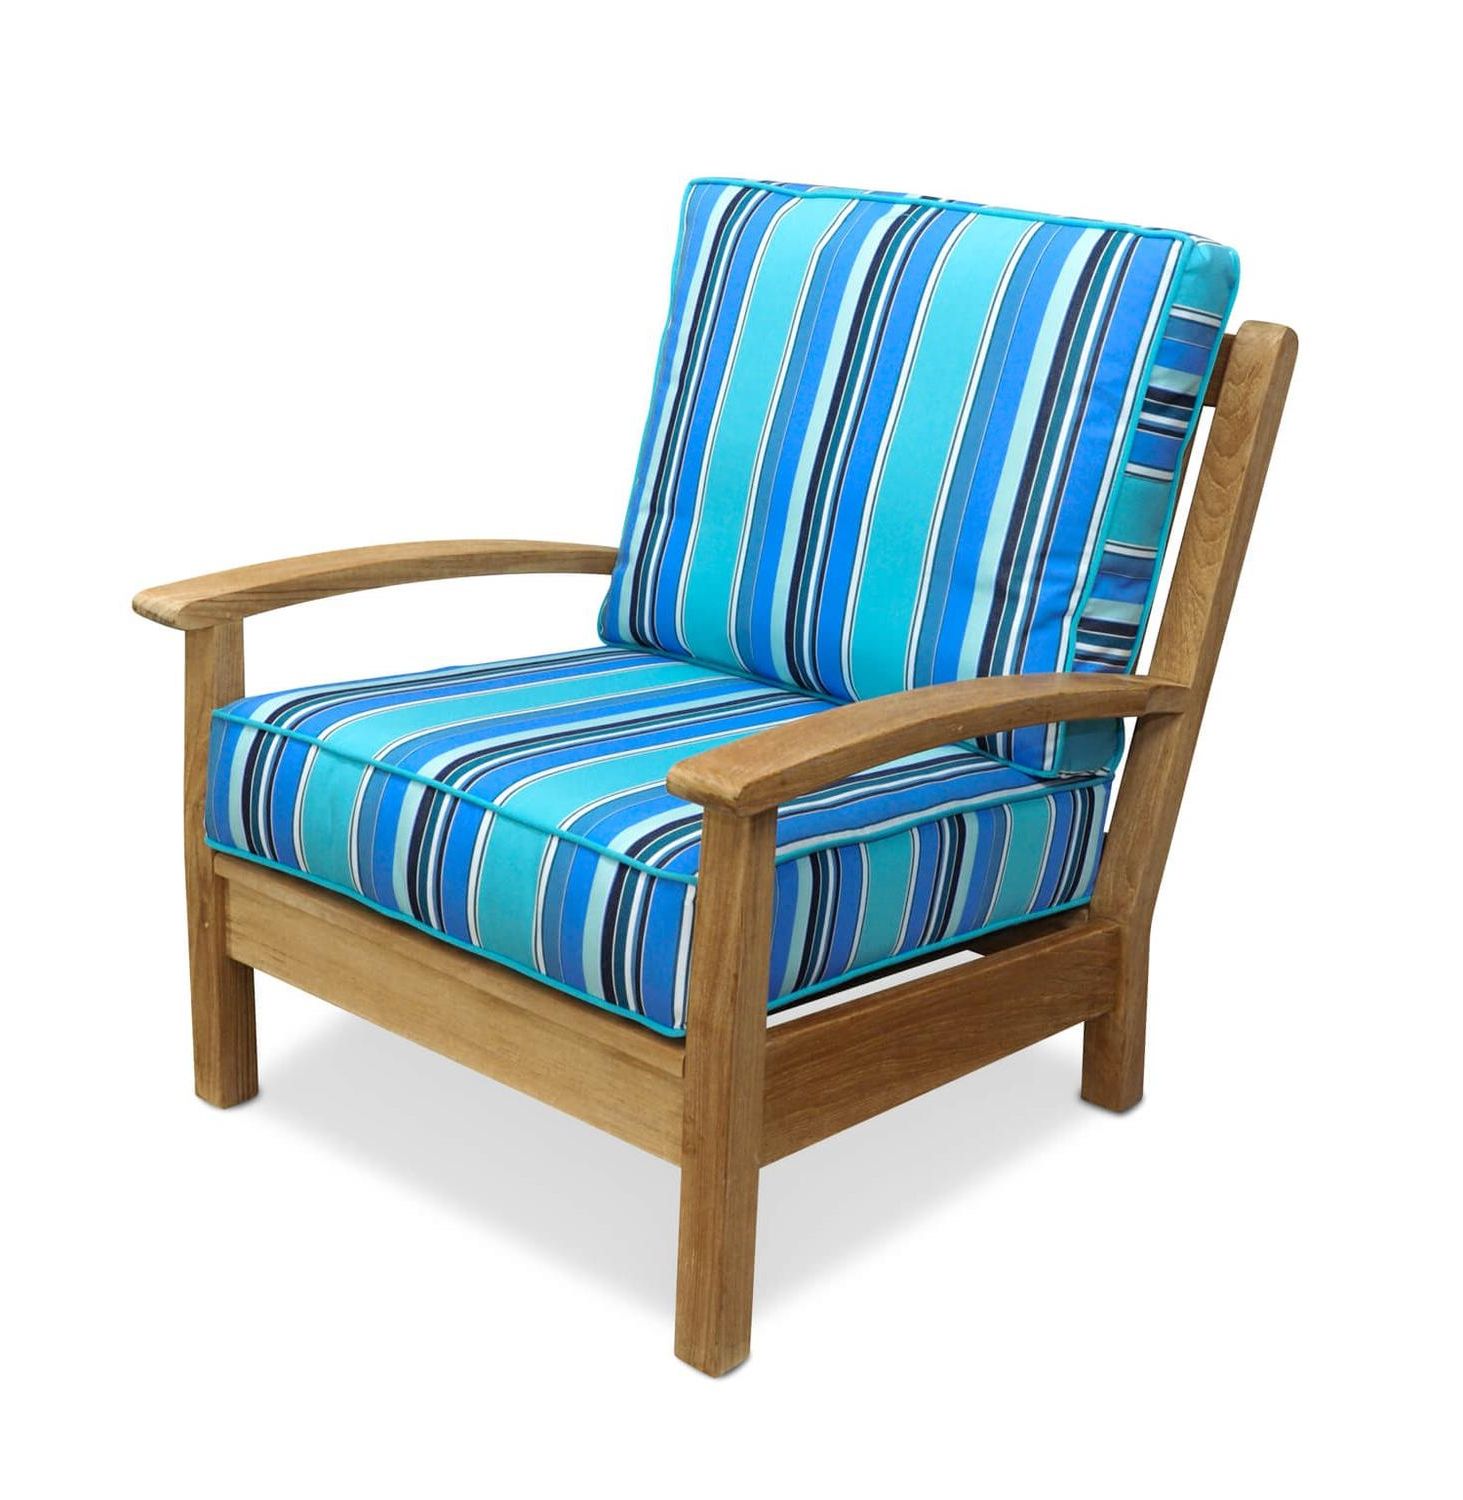 Natural Wood Outdoor Lounger Chairs Regarding Most Current 34" Natural Teak Deep Seating Outdoor Patio Lounge Chair With Blue (View 6 of 15)